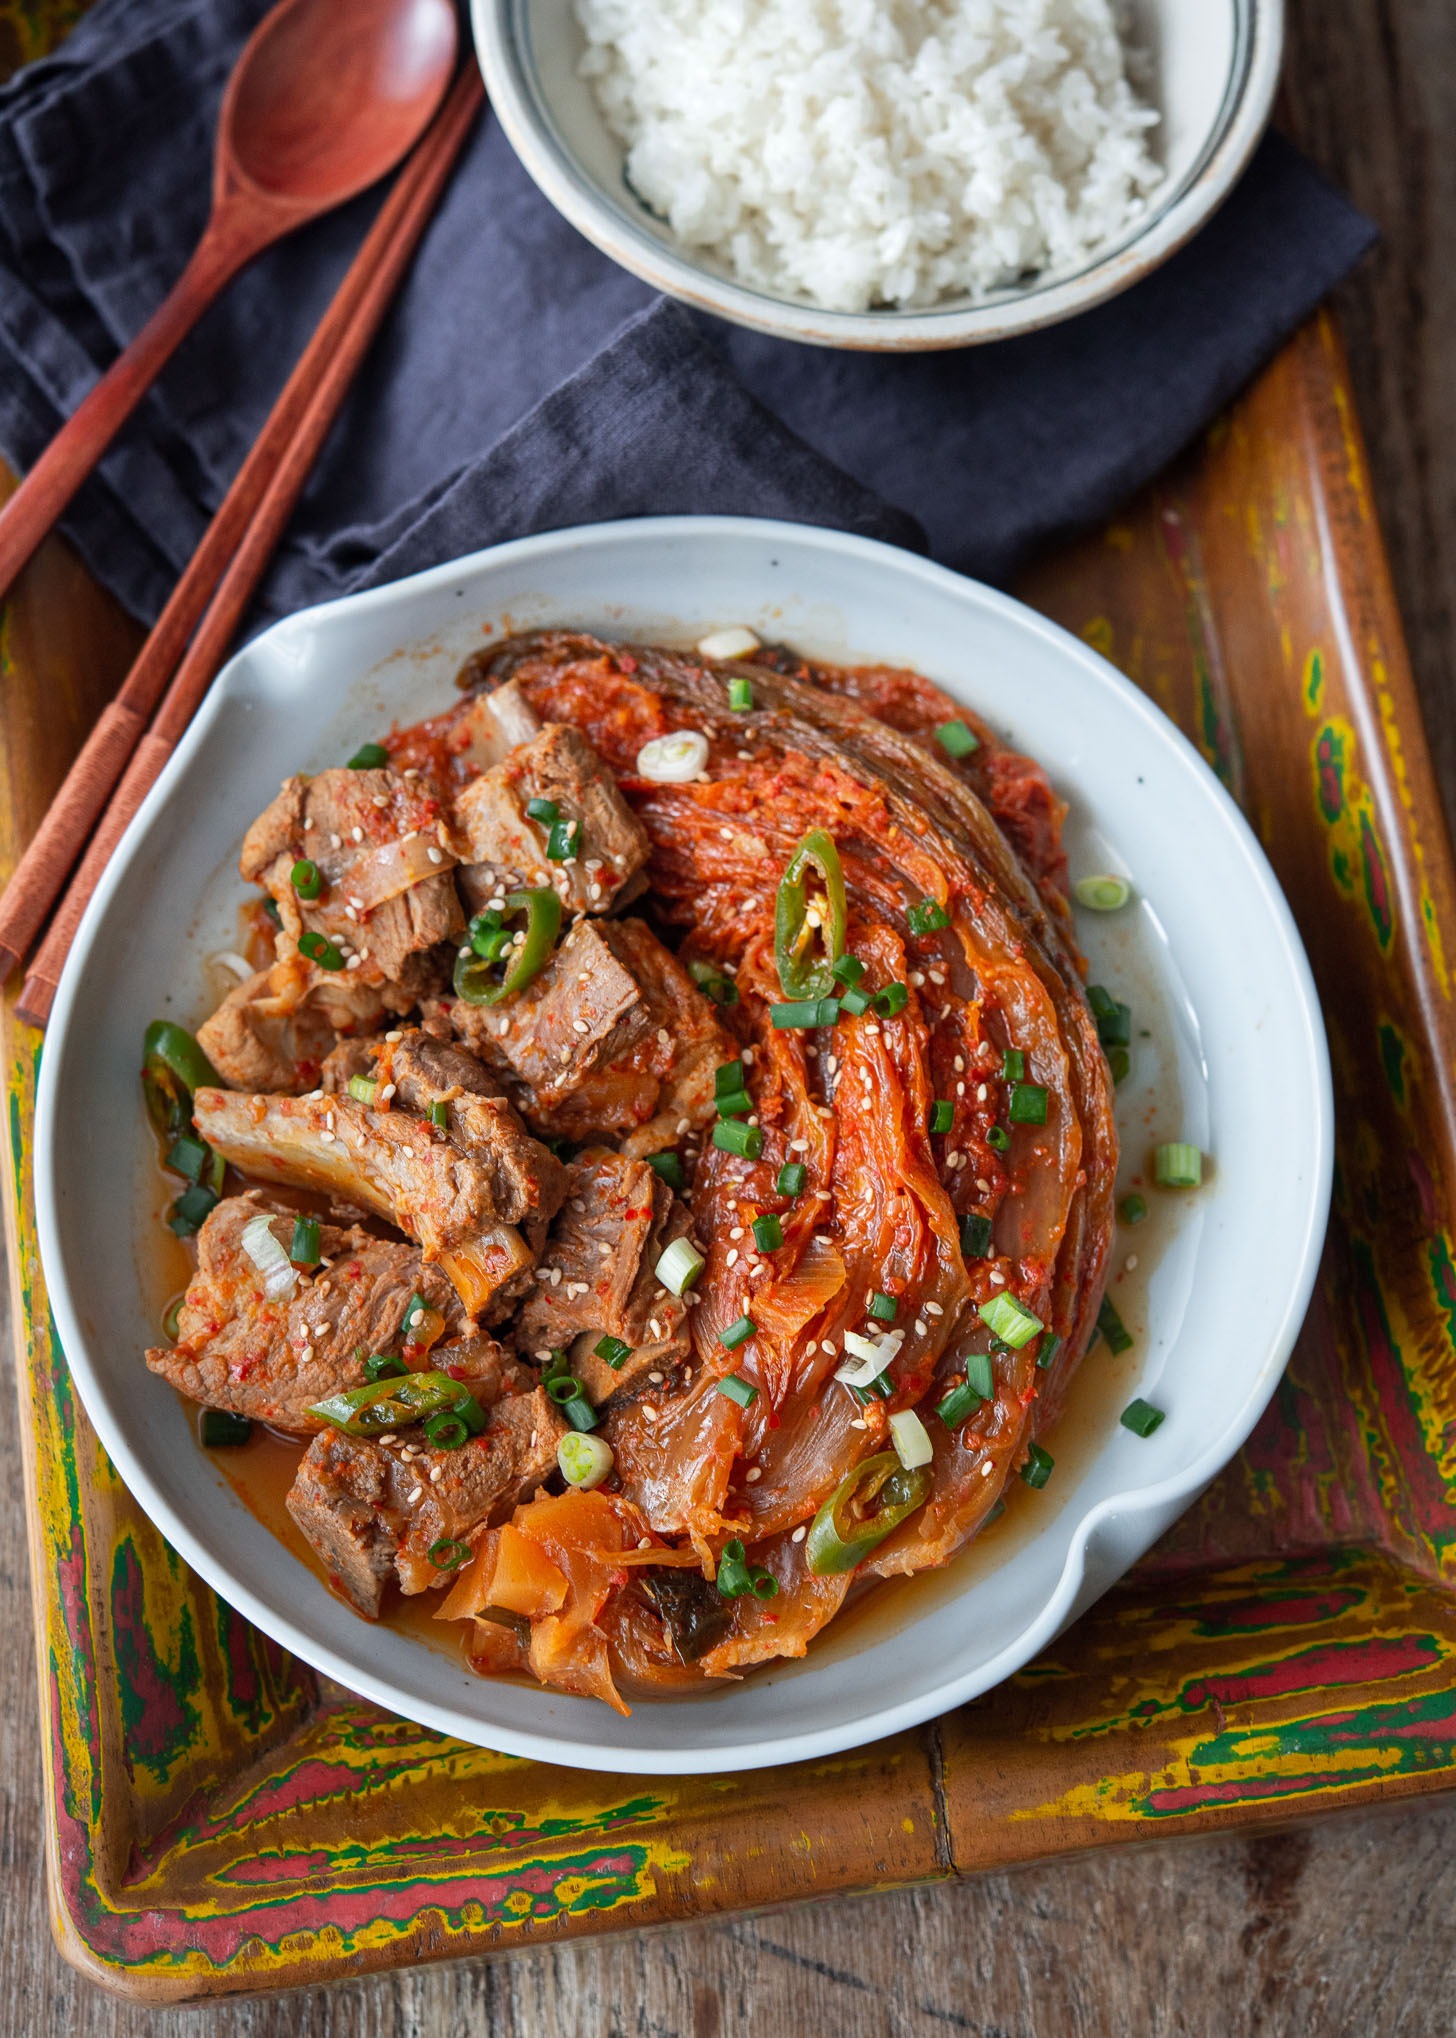 A plate of kimchi jjim with pork ribs is served with rice on a tray.